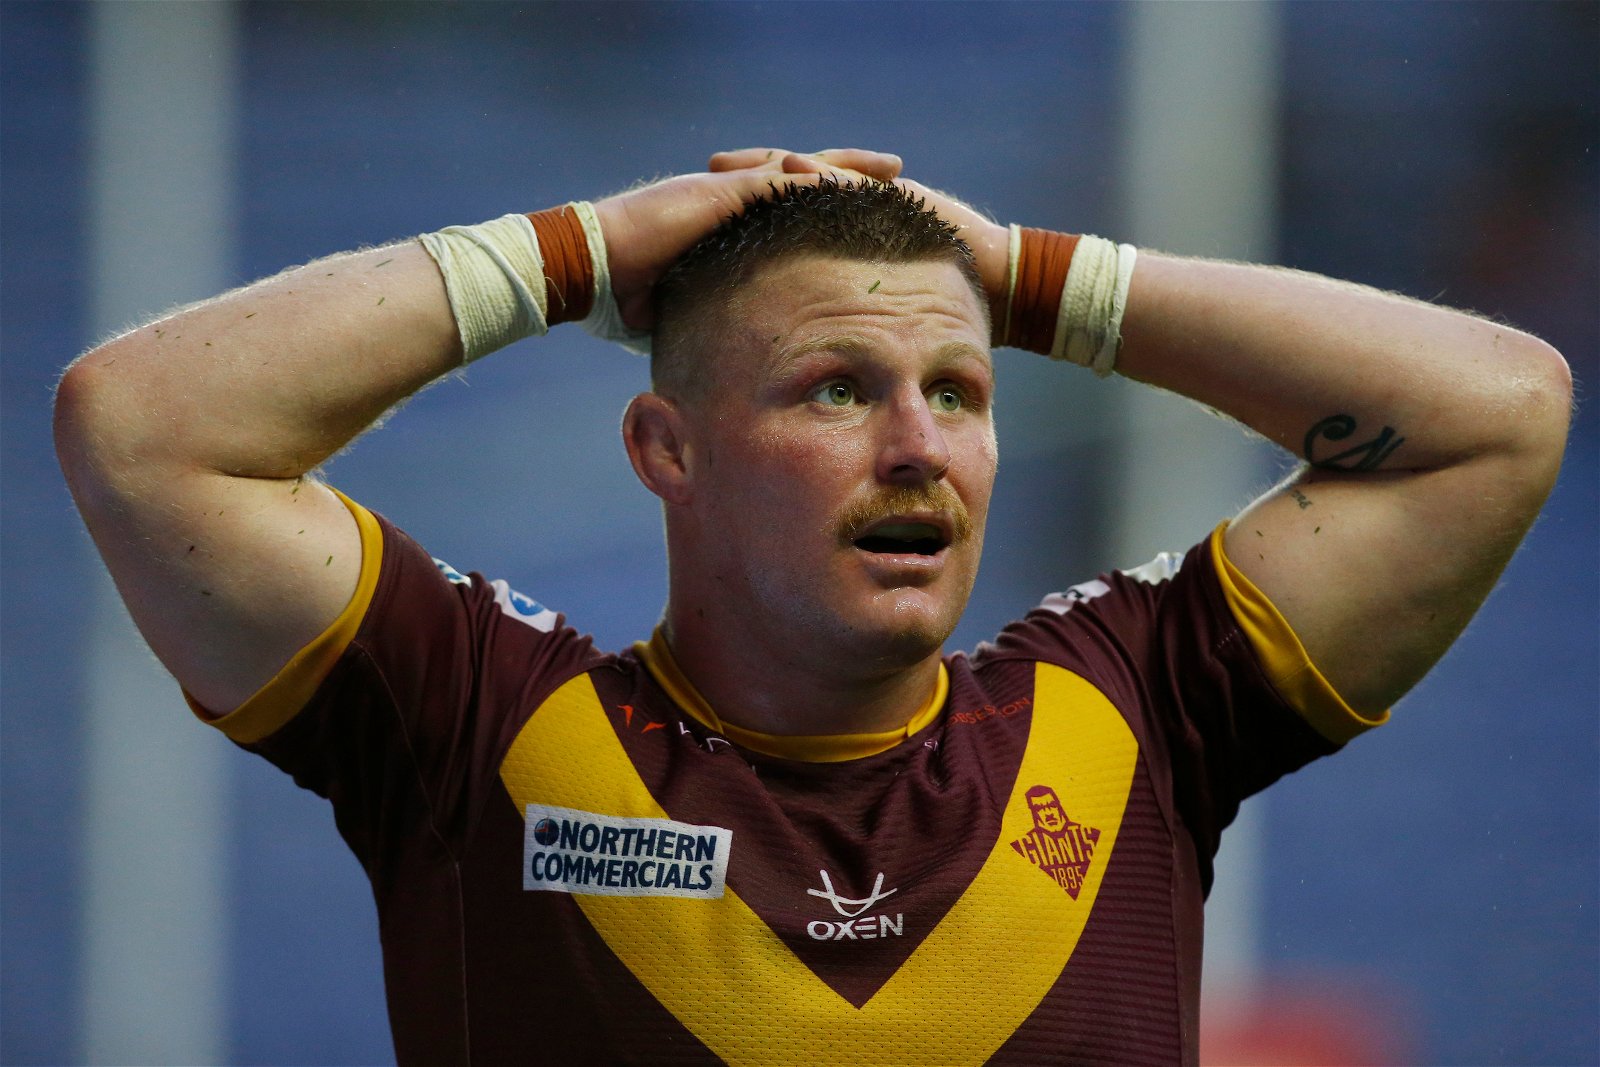 Huddersfield Giants captain Luke Yates has been hit with a three-game ban, one that assistant coach Luke Robinson has labelled an "injustice". - 